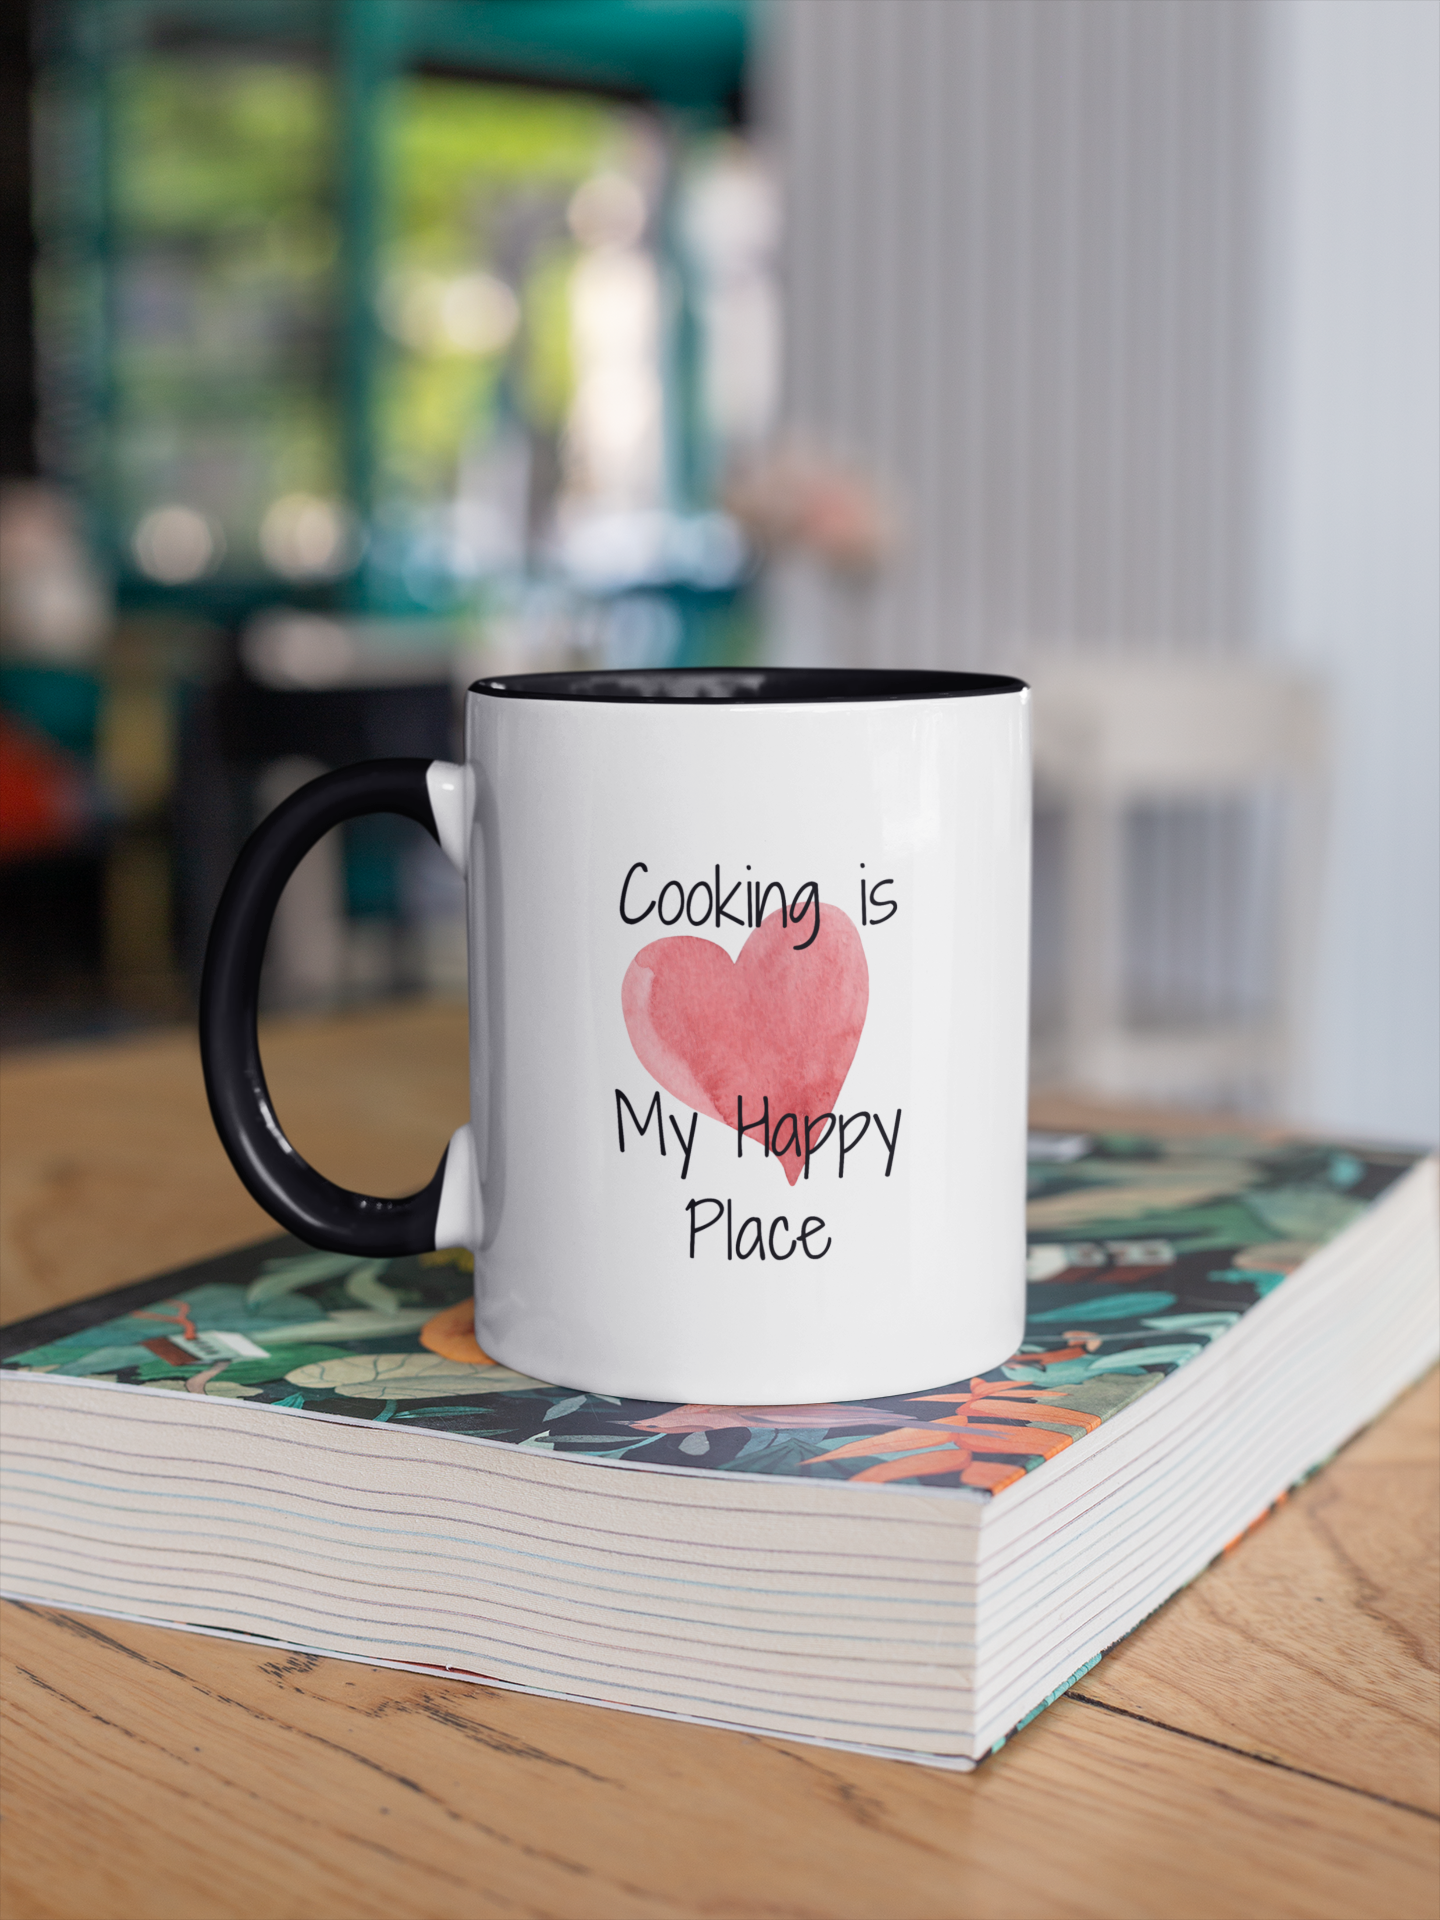 Coffee Mug, Cooking is My Happy Place 11oz Ceramic Mug with Light-Hearted Design, Dishwasher and Microwave Safe, Perfect Gift for Hot Beverage Lovers - cooking mug 10